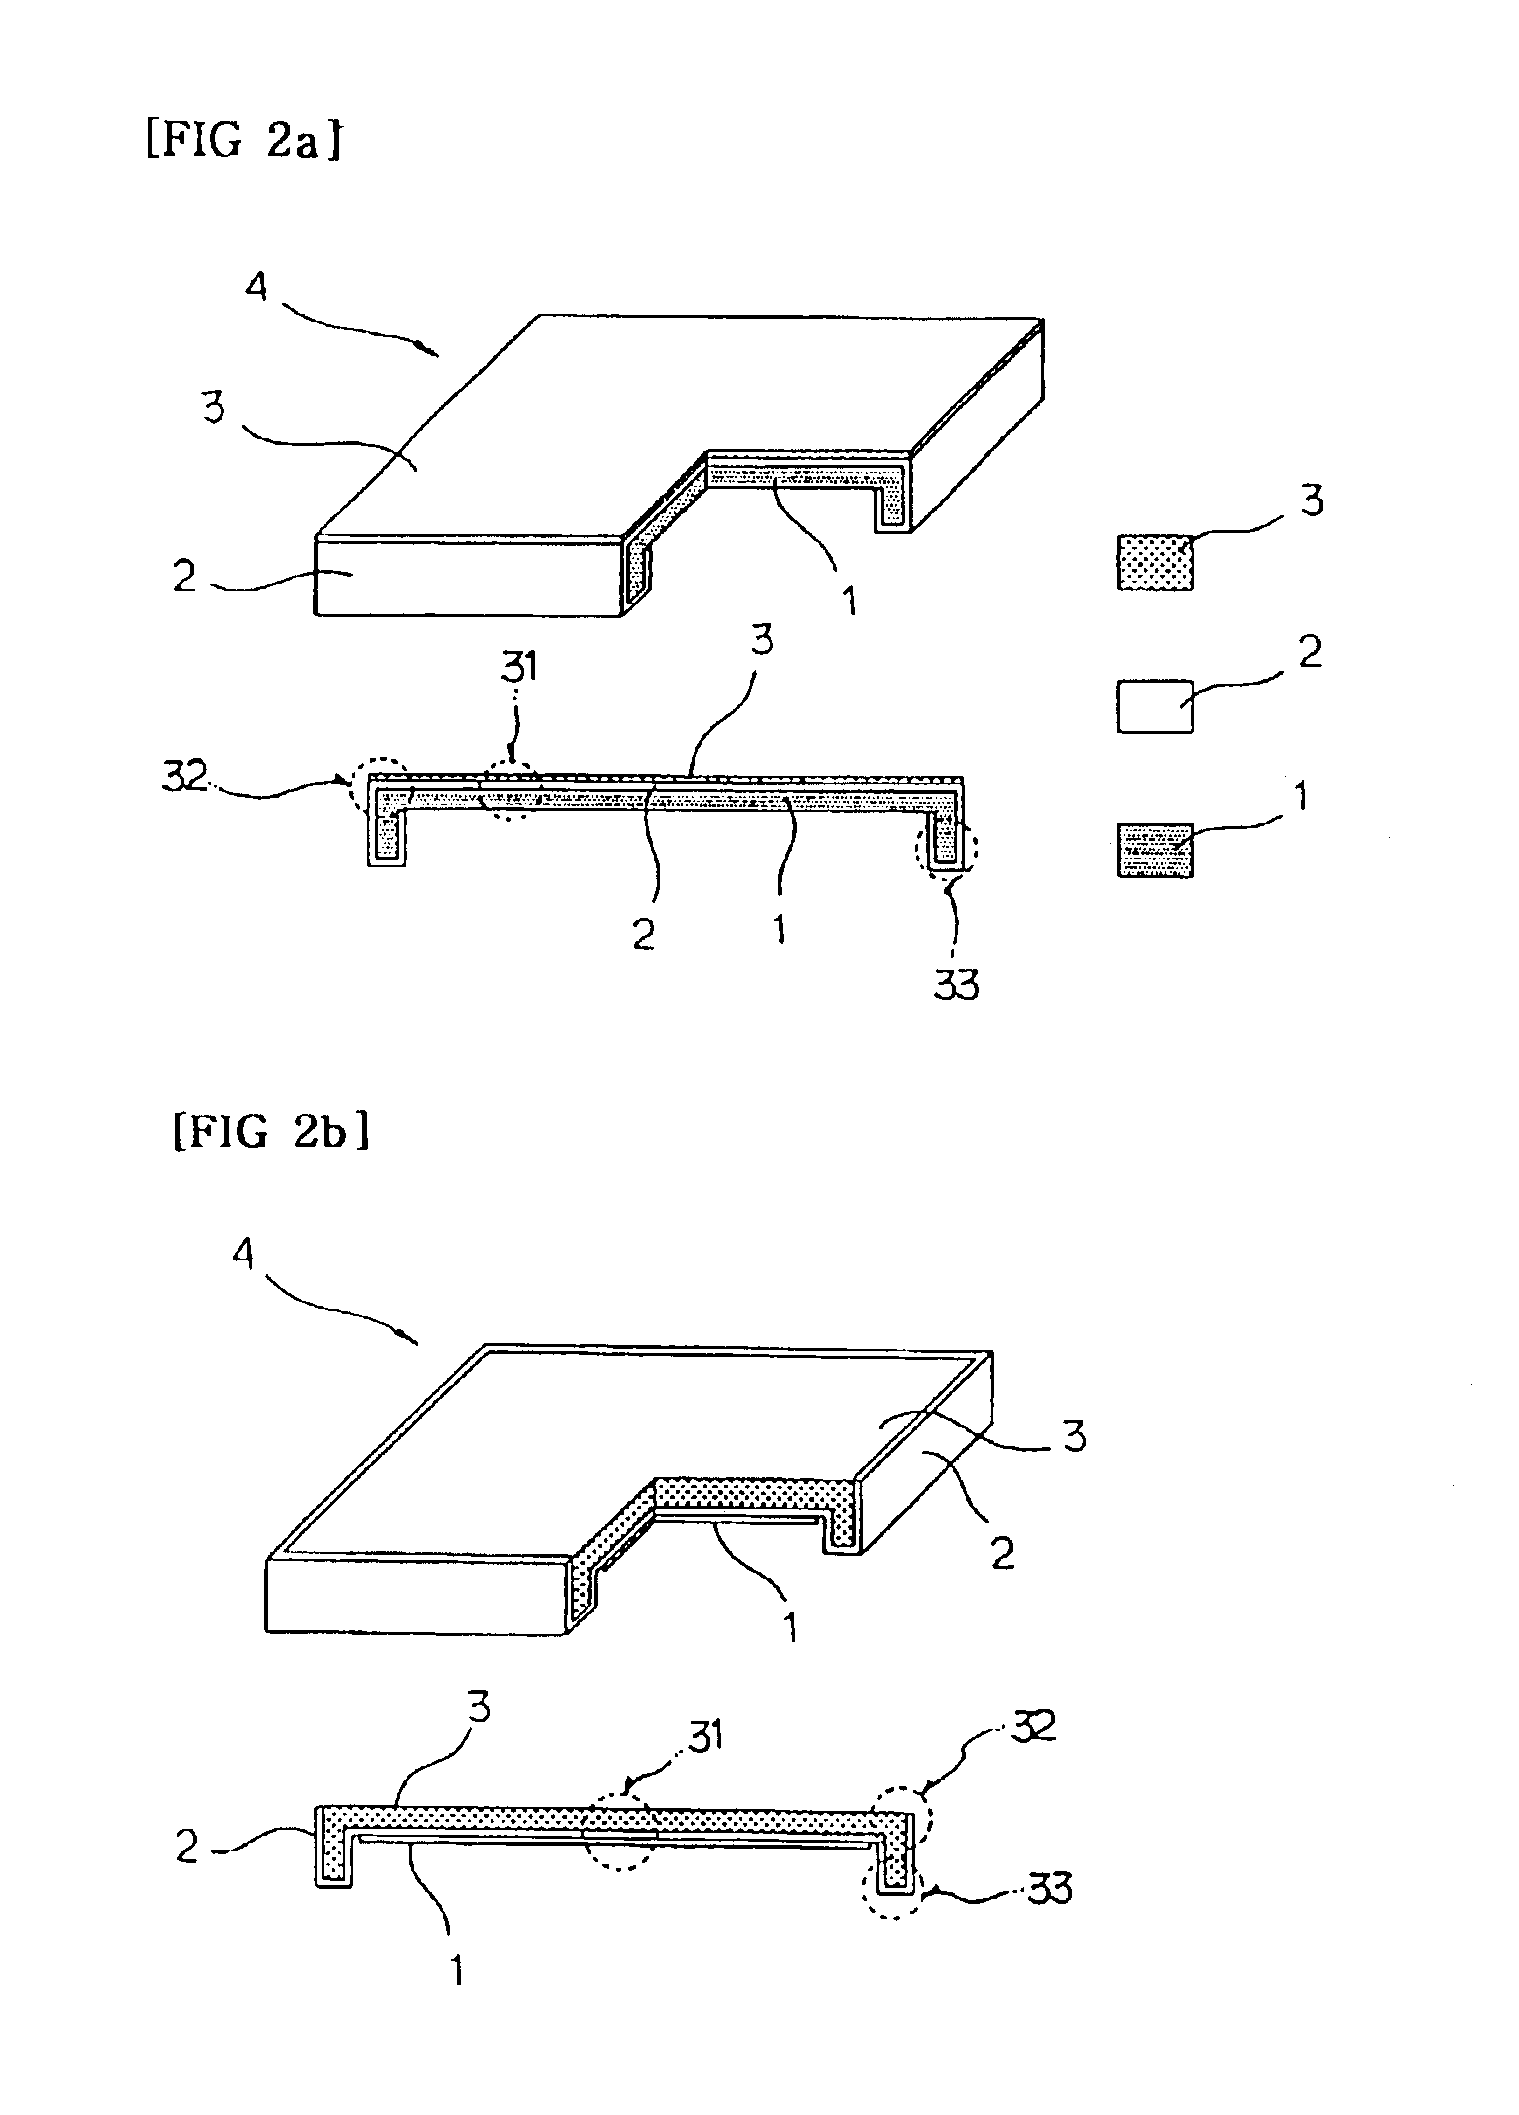 Single cell and stack structure for solid oxide fuel cell stacks